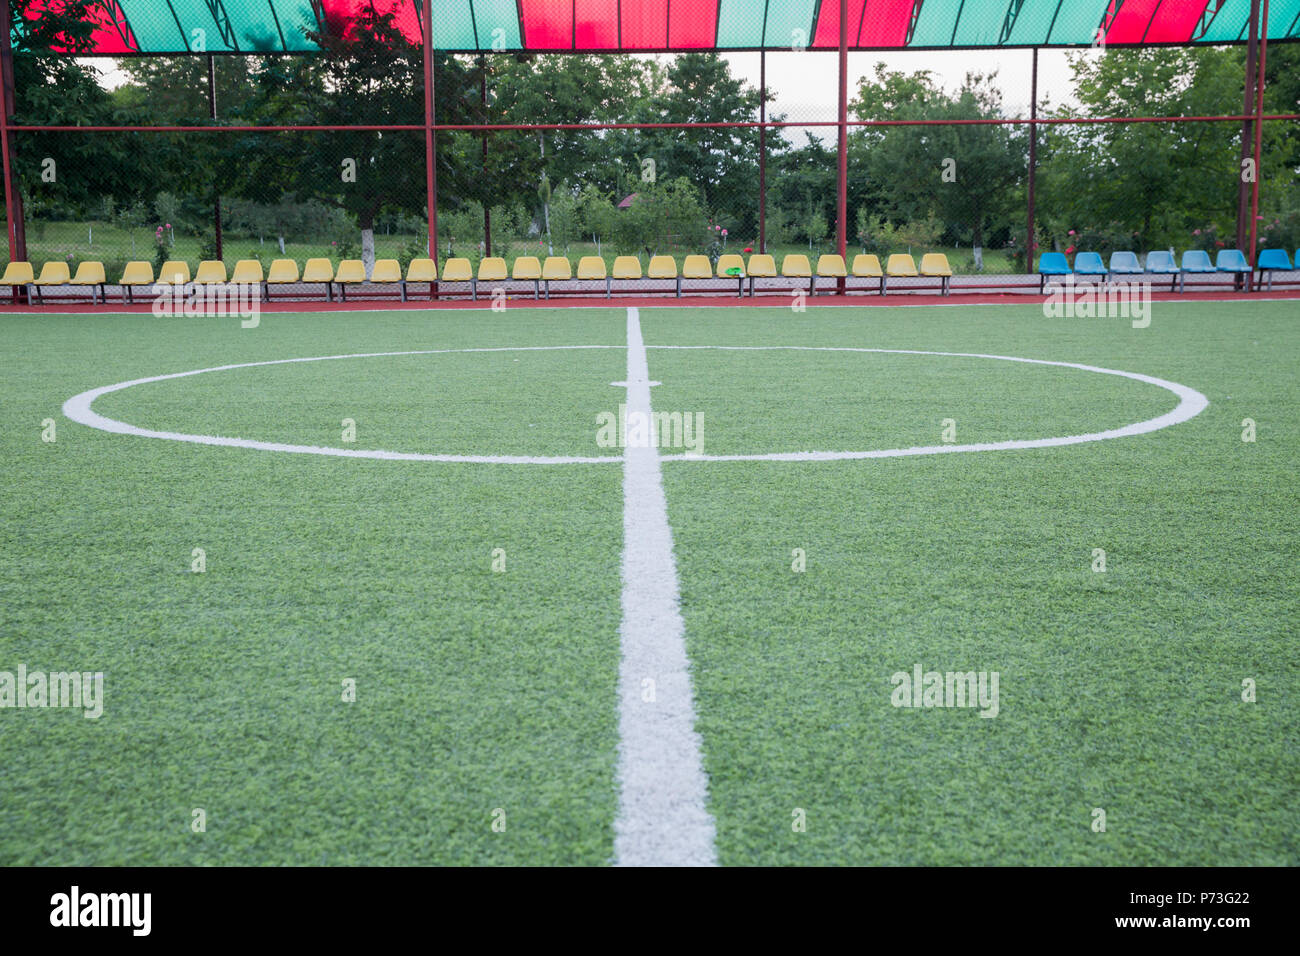 Mini Football Goal On An Artificial Grass Inside Of Indoor Football Field Mini Football Stadium Center Soccer Field Center And Ball Top View Background Stock Photo Alamy